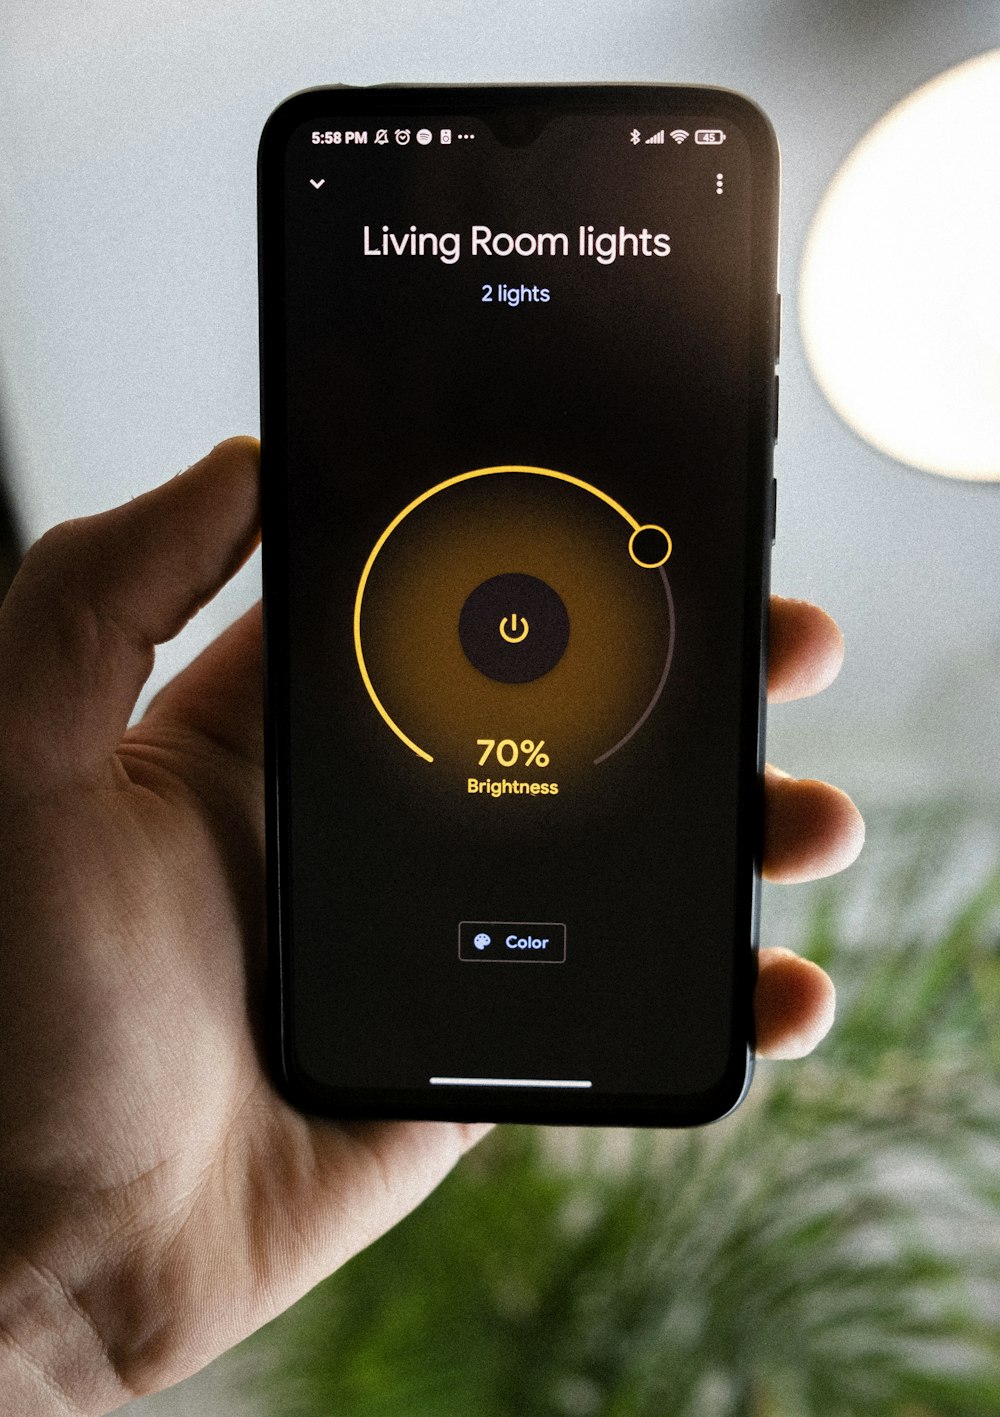 smart home features - Phone controls Living Room Lights | Photo by Moritz Kindler from Unsplash